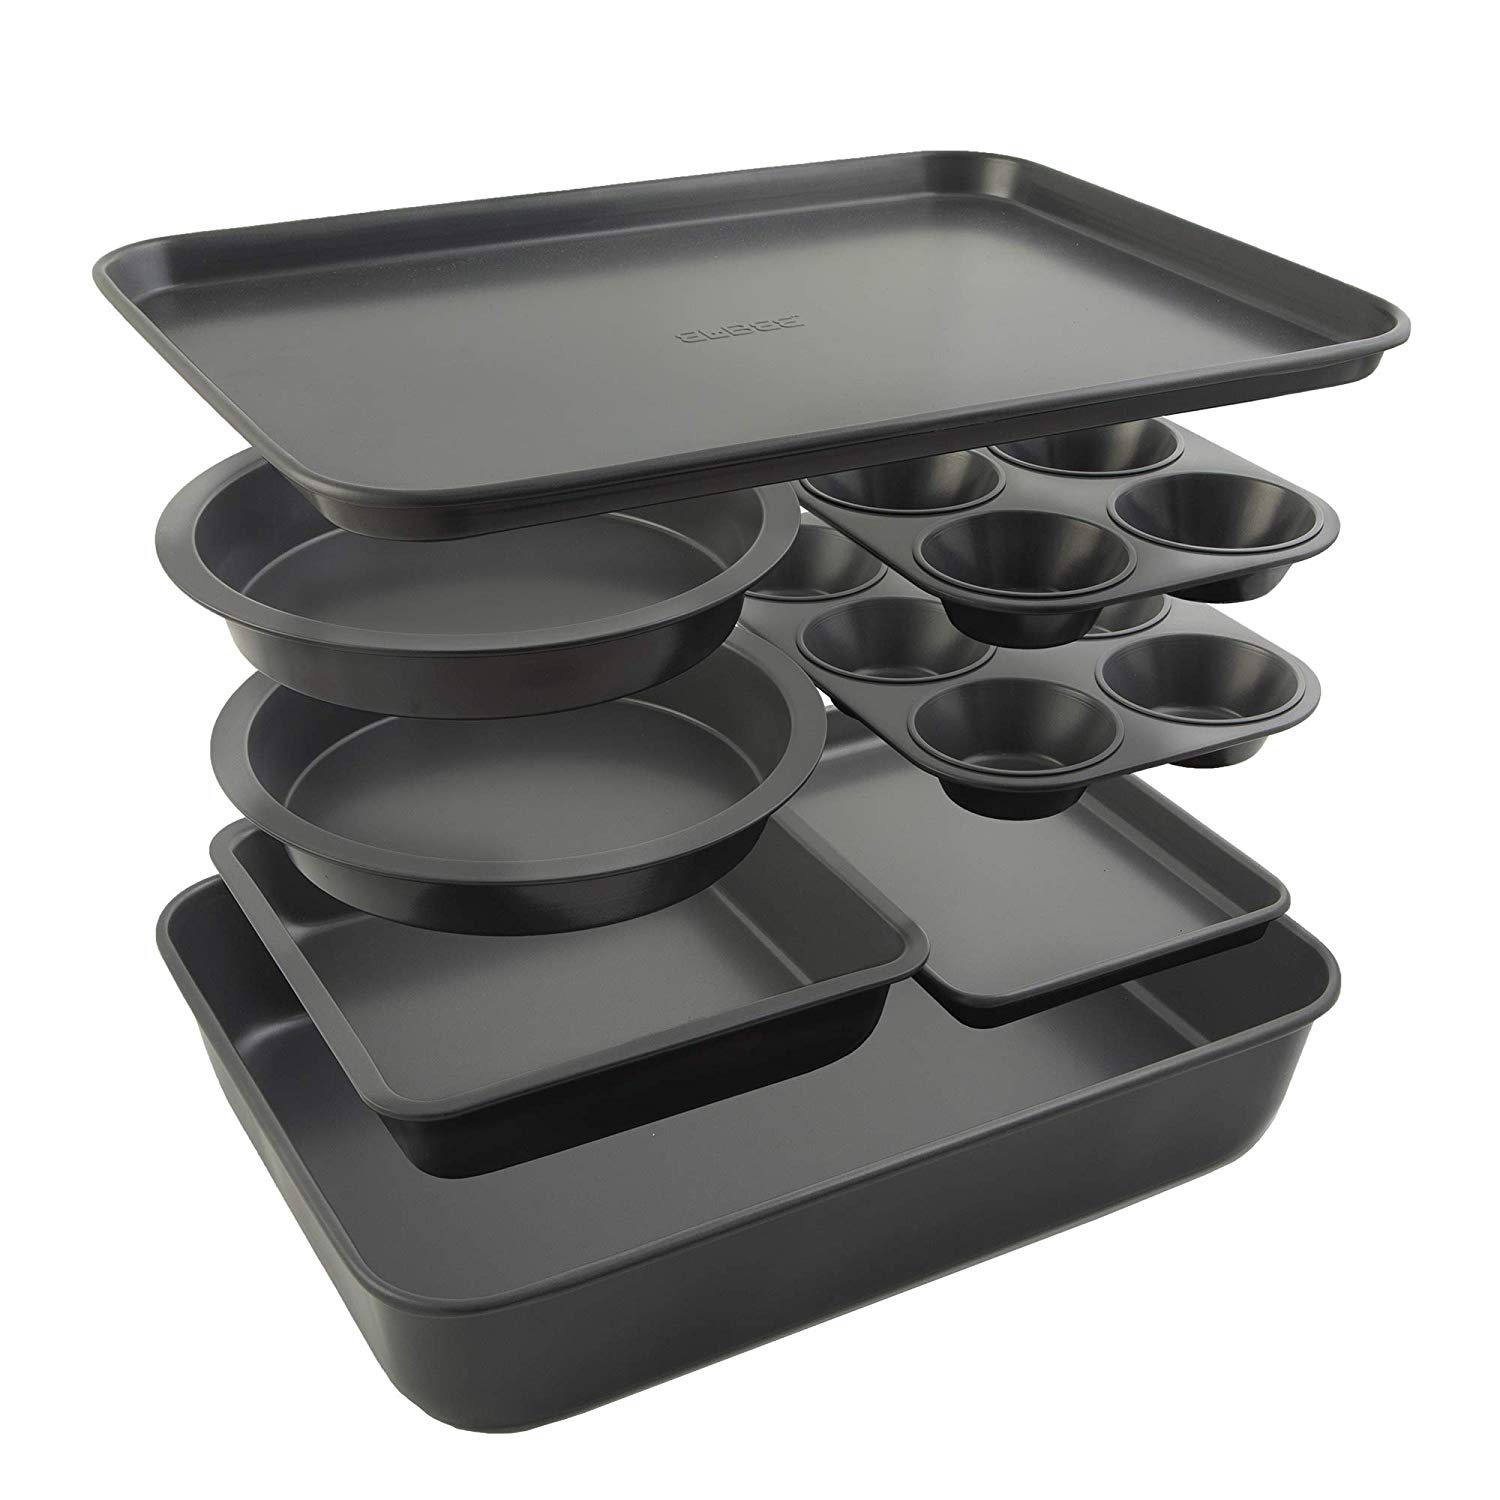 NutriChef 6-Piece Nonstick Bakeware Set - Carbon Steel Baking Tray Set w/  Heatsafe Red Silicone Handles, Oven Safe Up to 450°F, Loaf Muffin